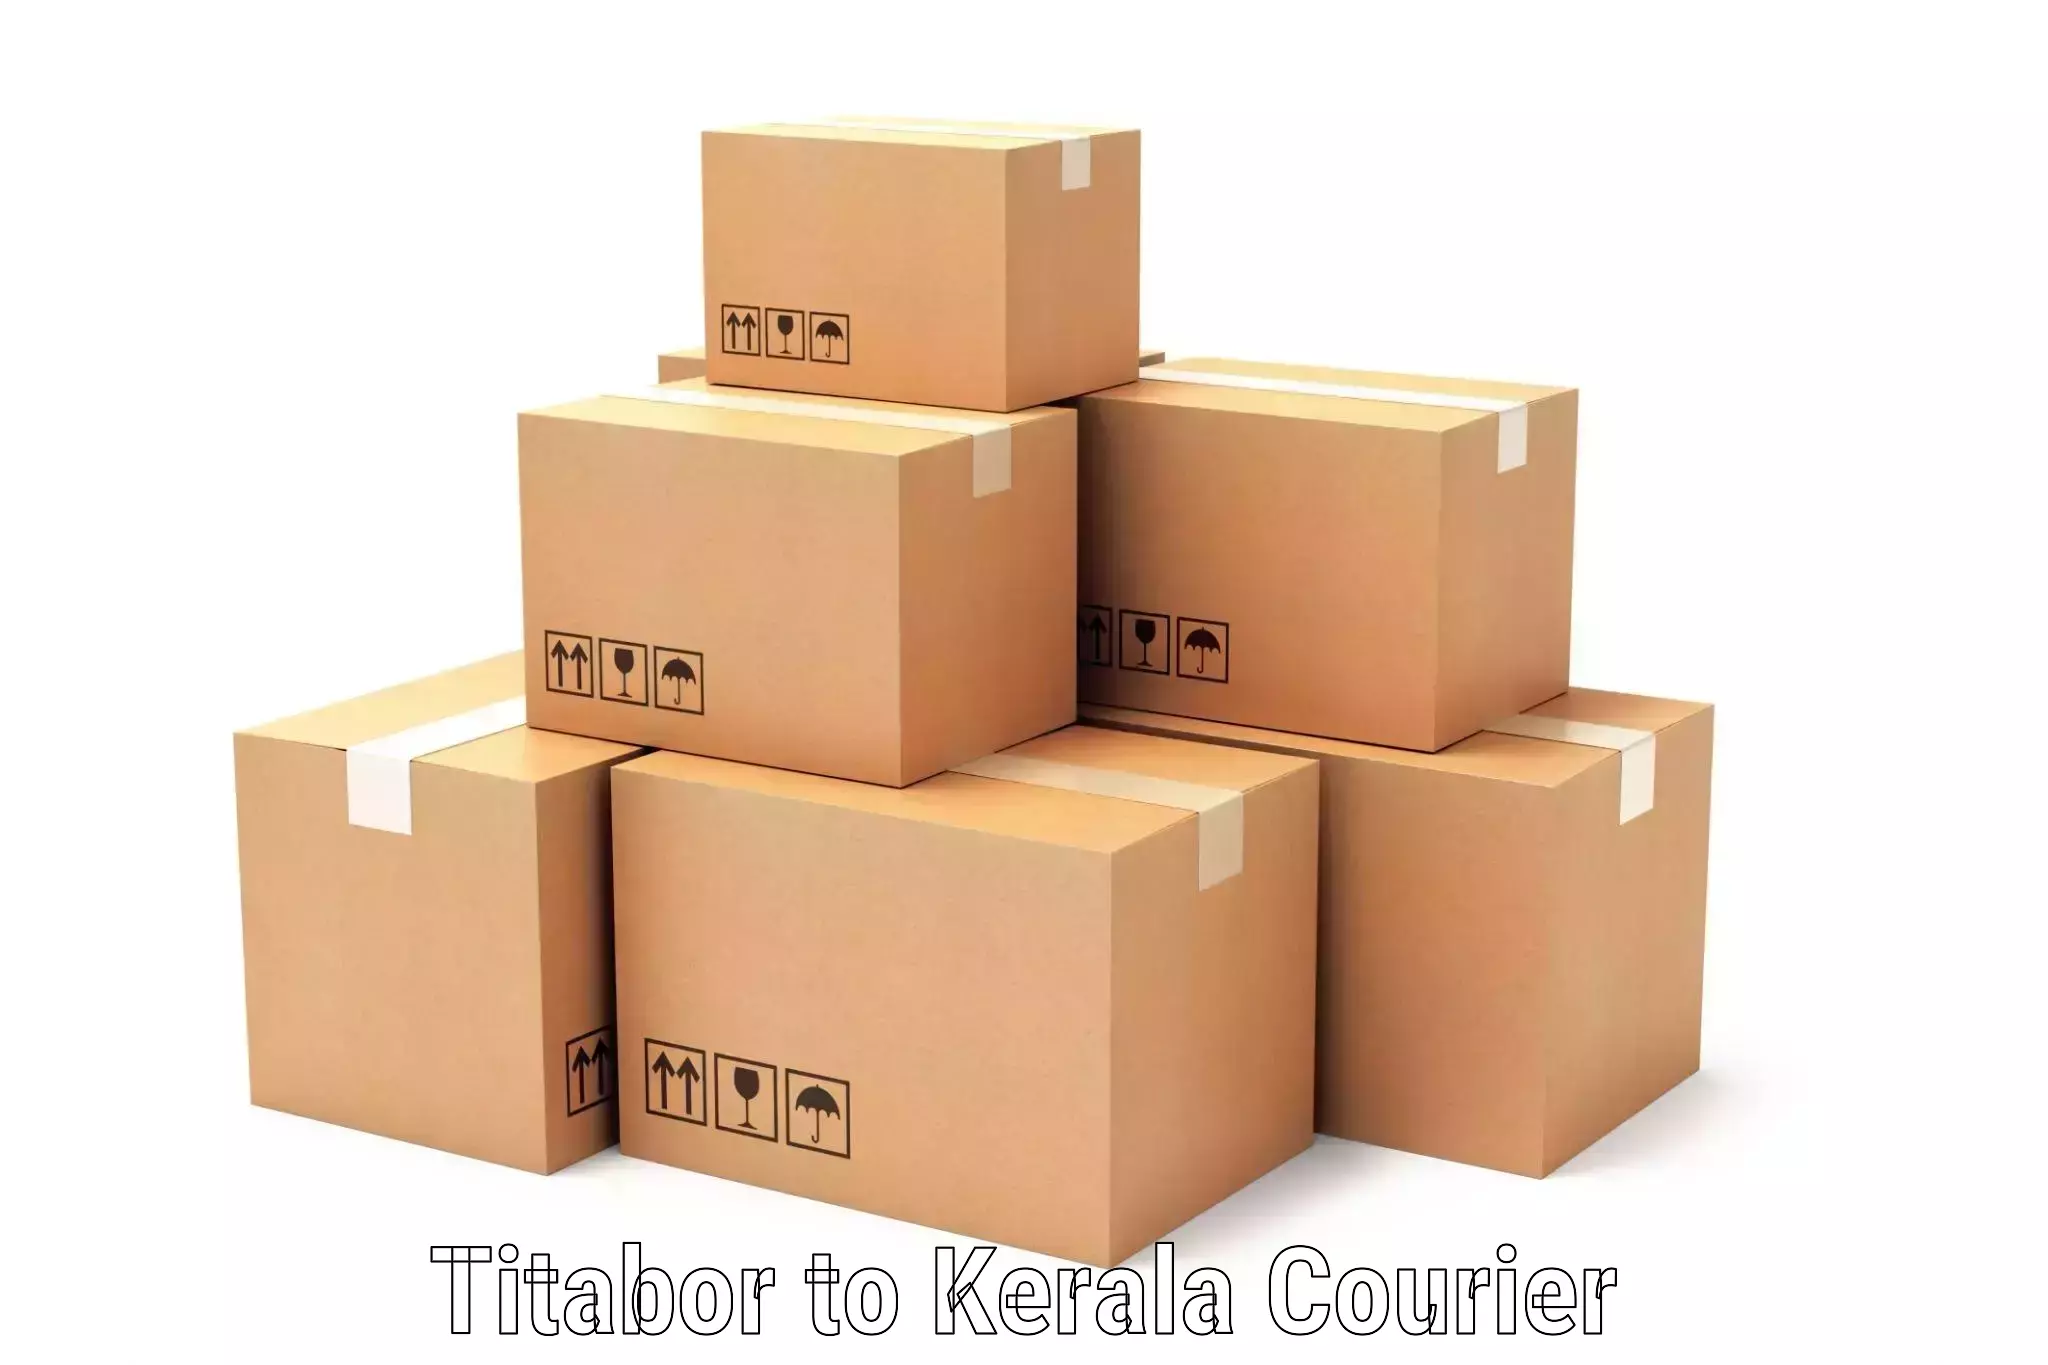 Next day courier Titabor to Chengannur